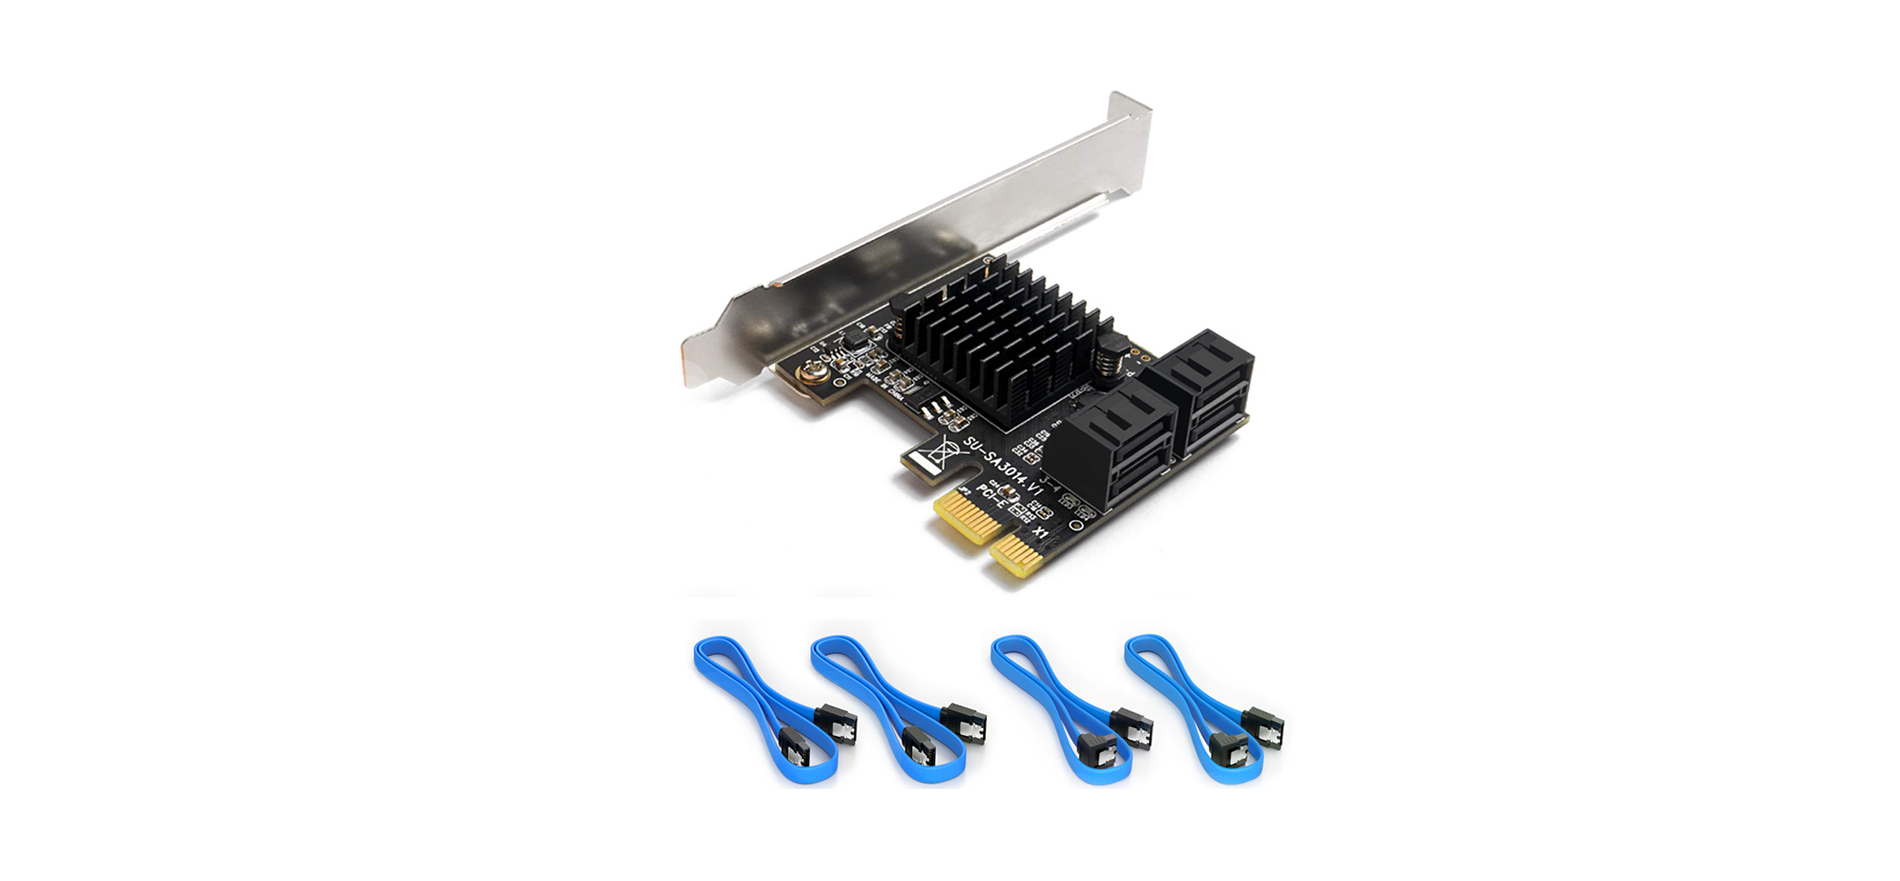 Shenzhen Visionde Electronic Technology Co., Ltd-Network card/bluetooth  adapter/PCIe riser for mining/LAN Expansion Card/network switch/Wifi card/ wireless network card/Internal Computer Networking Cards